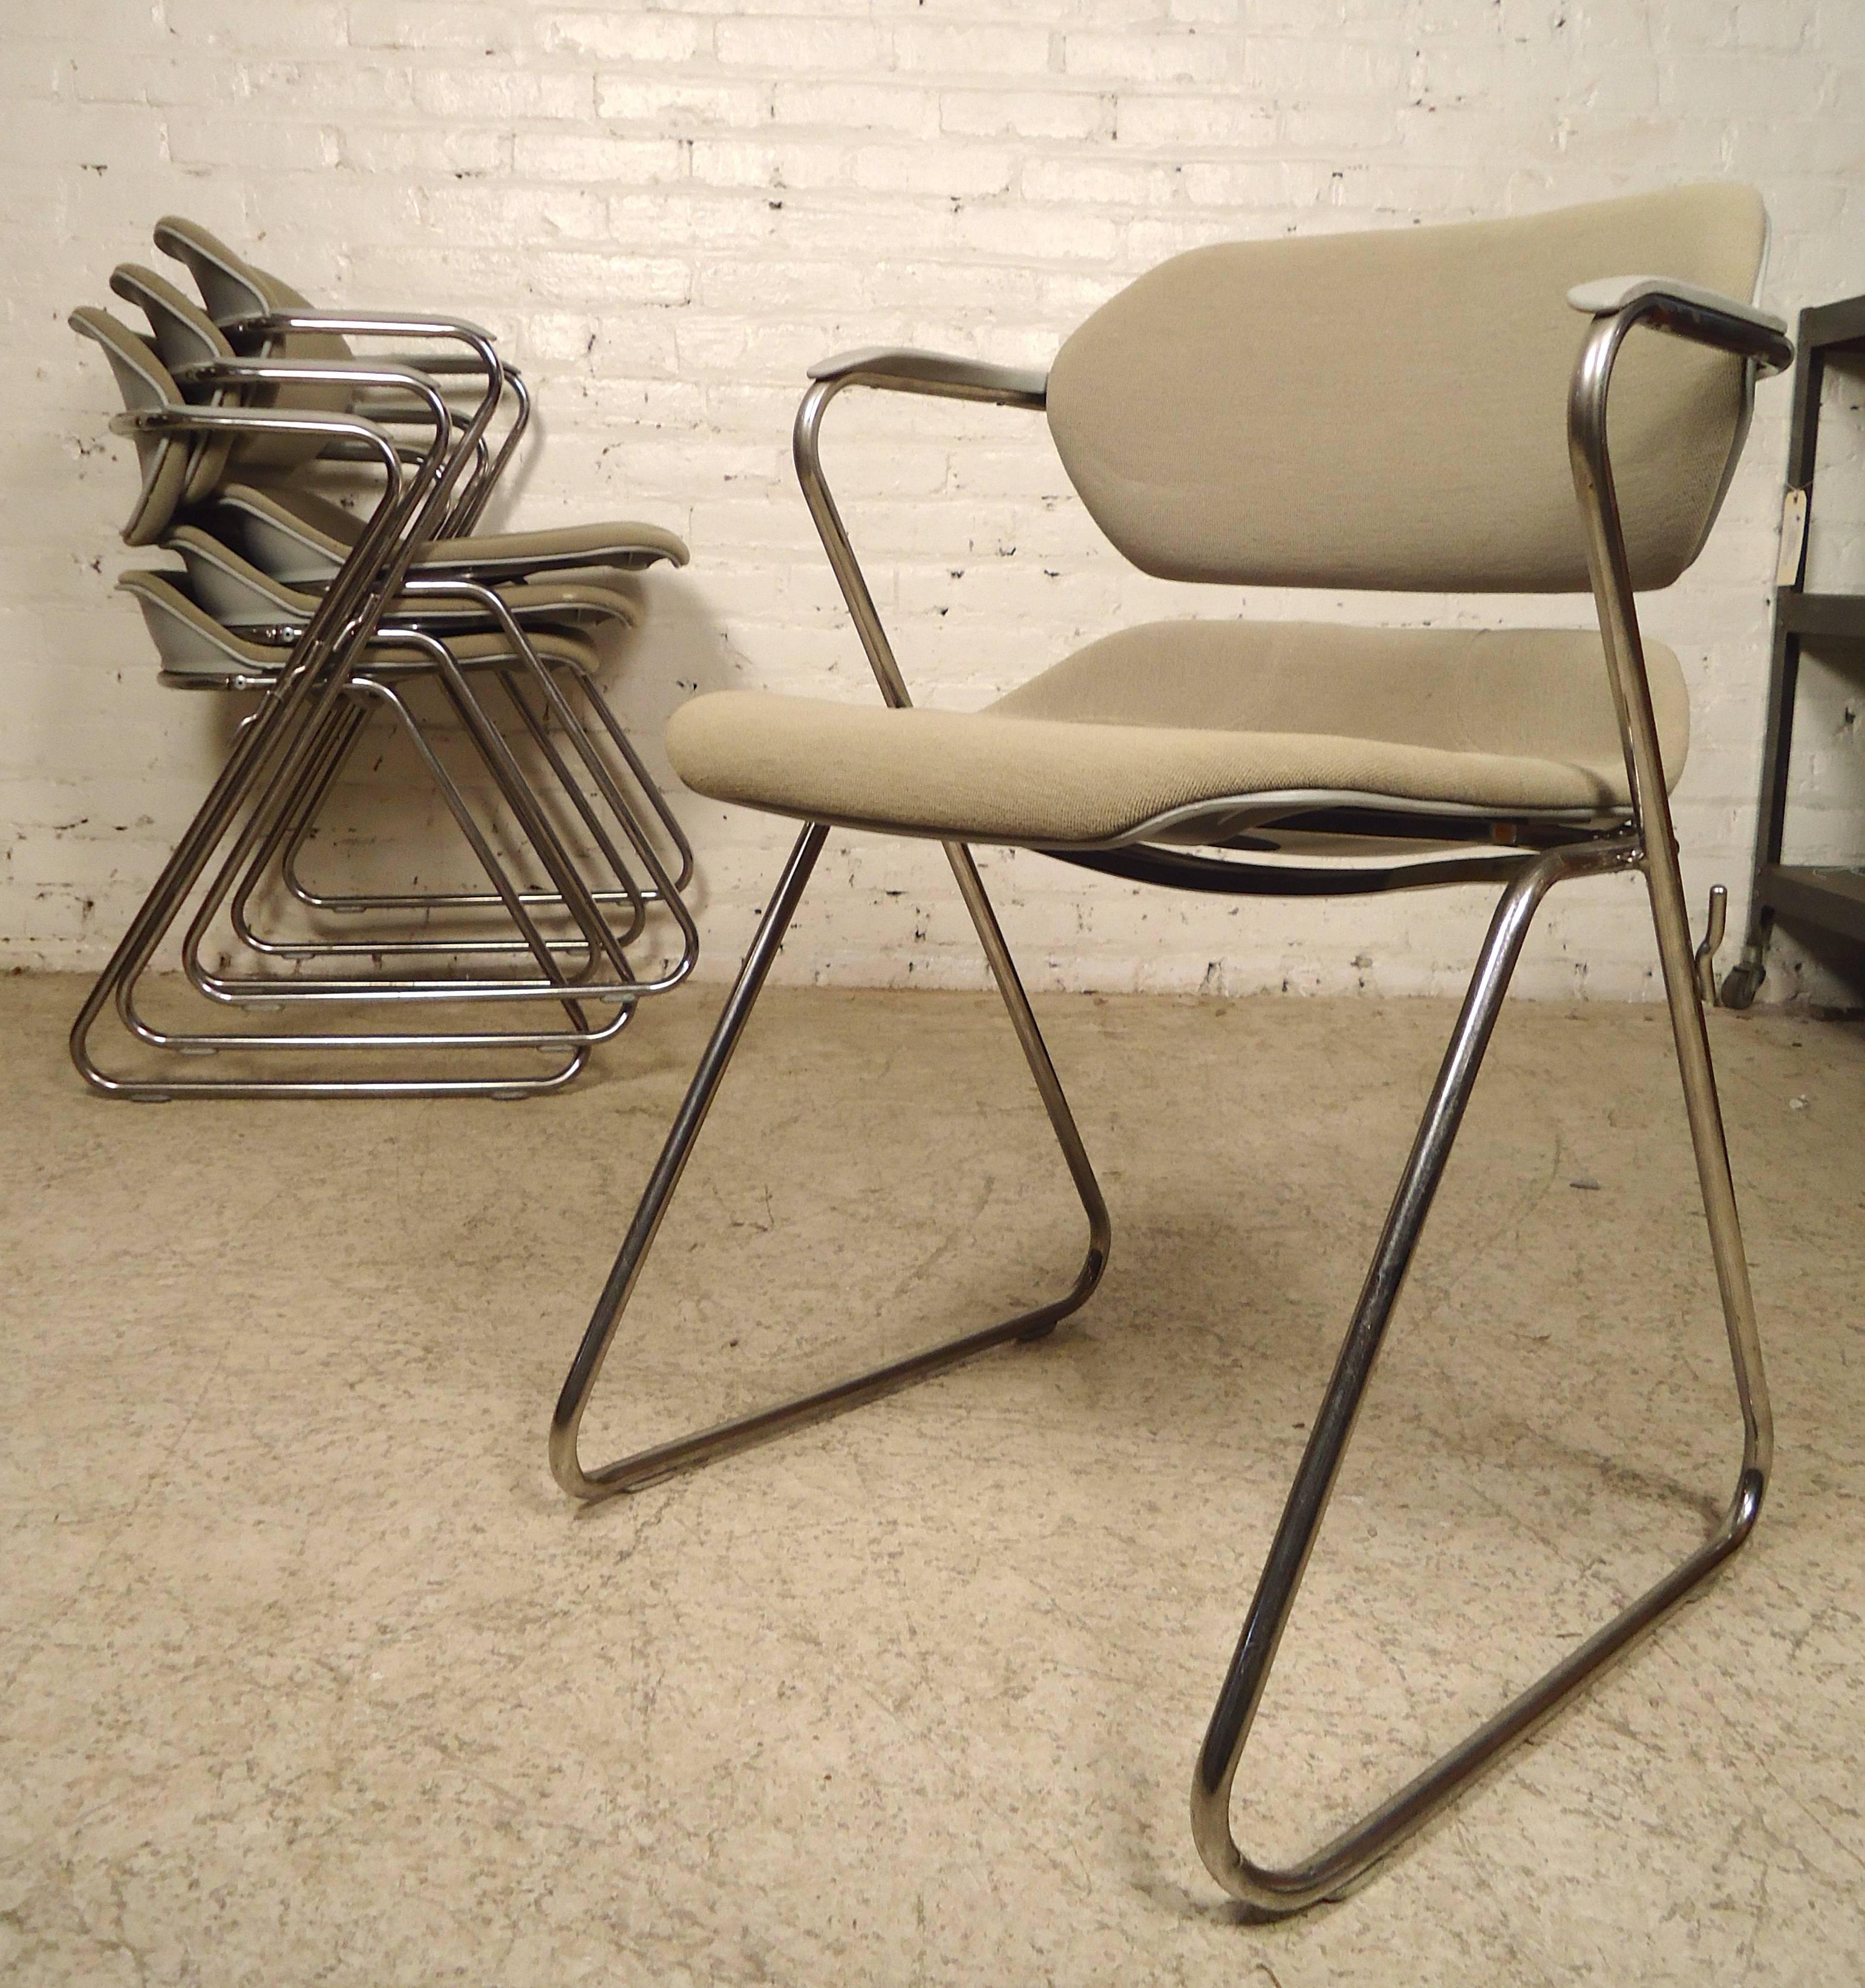 Unusual office chairs with unique Z-shape design, polished chrome frame and cushioned seat and back. Chairs can be stacked.

(Please confirm item location NY or NJ with dealer).
                 